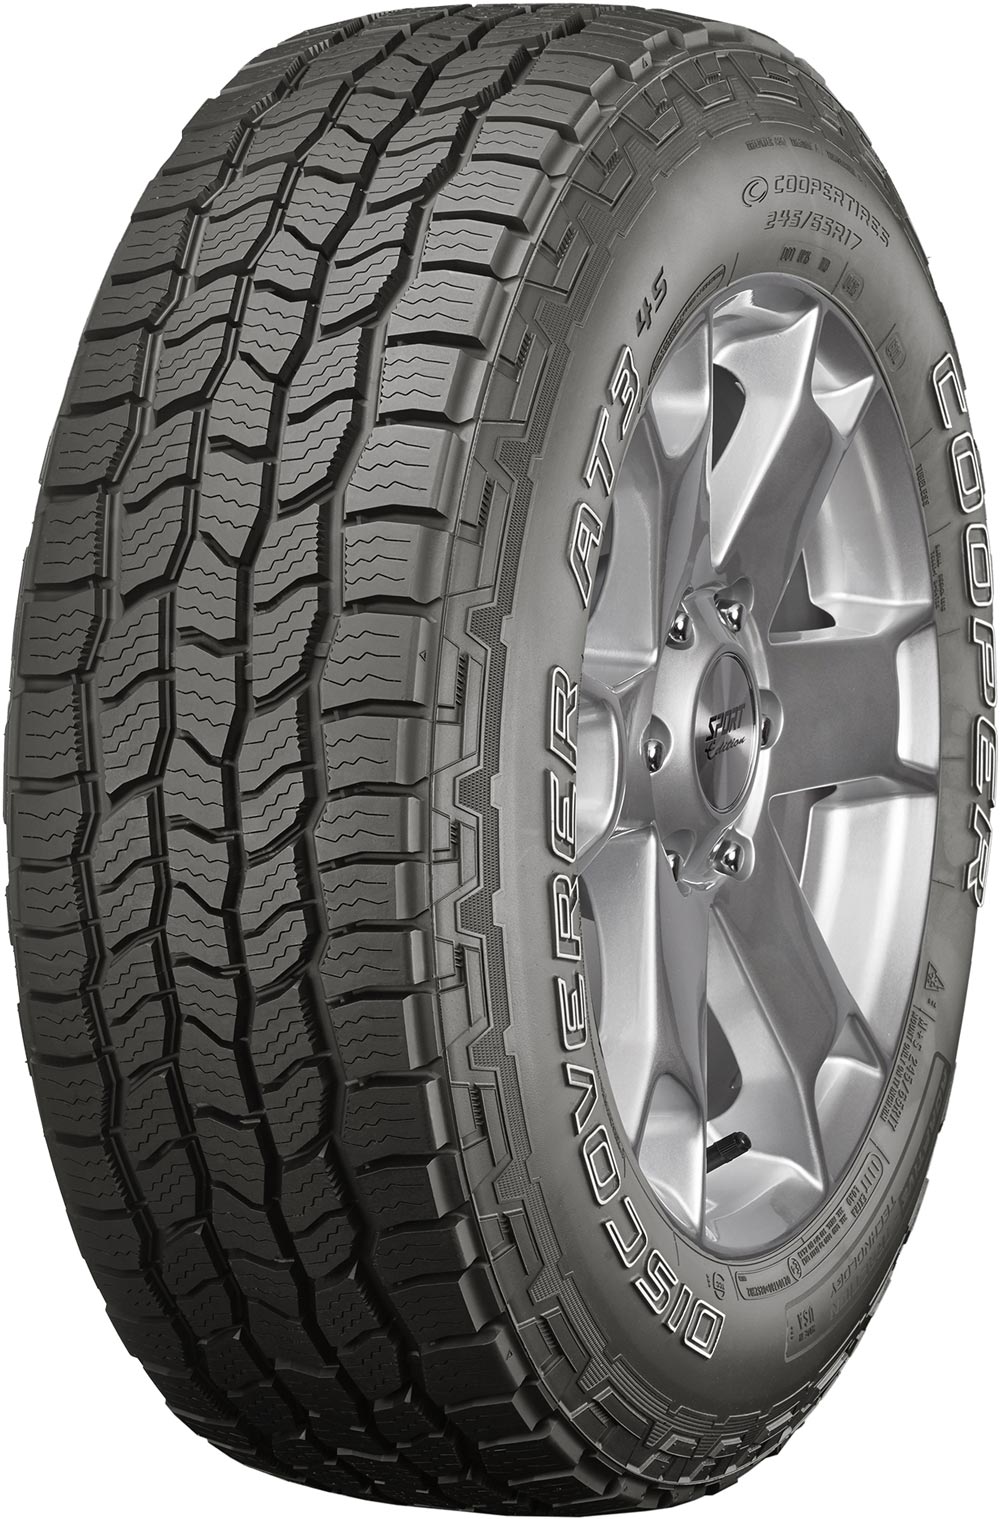 Гуми за джип COOPER DISCOVERER AT3 4S OWL 245/70 R16 107T